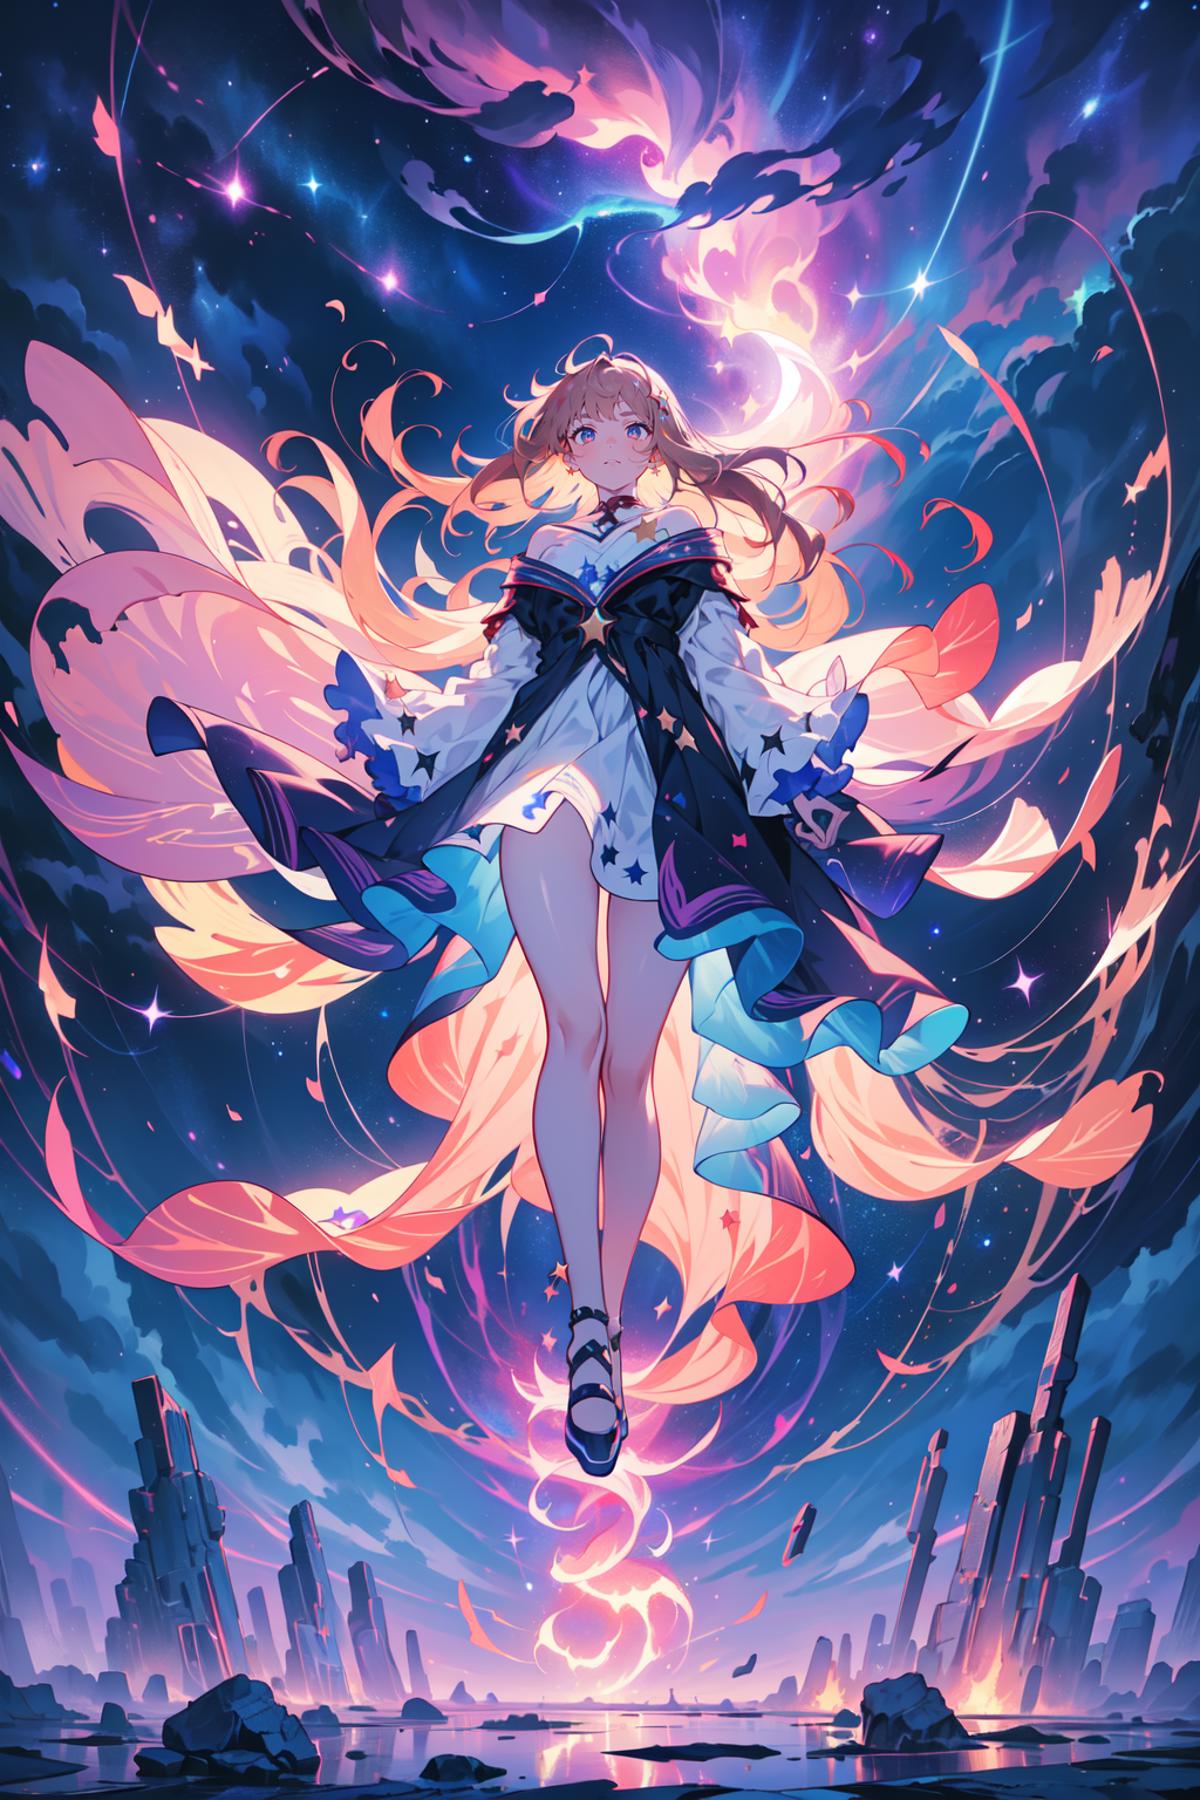 Anime girl with blue eyes and long hair wearing a flowing dress.